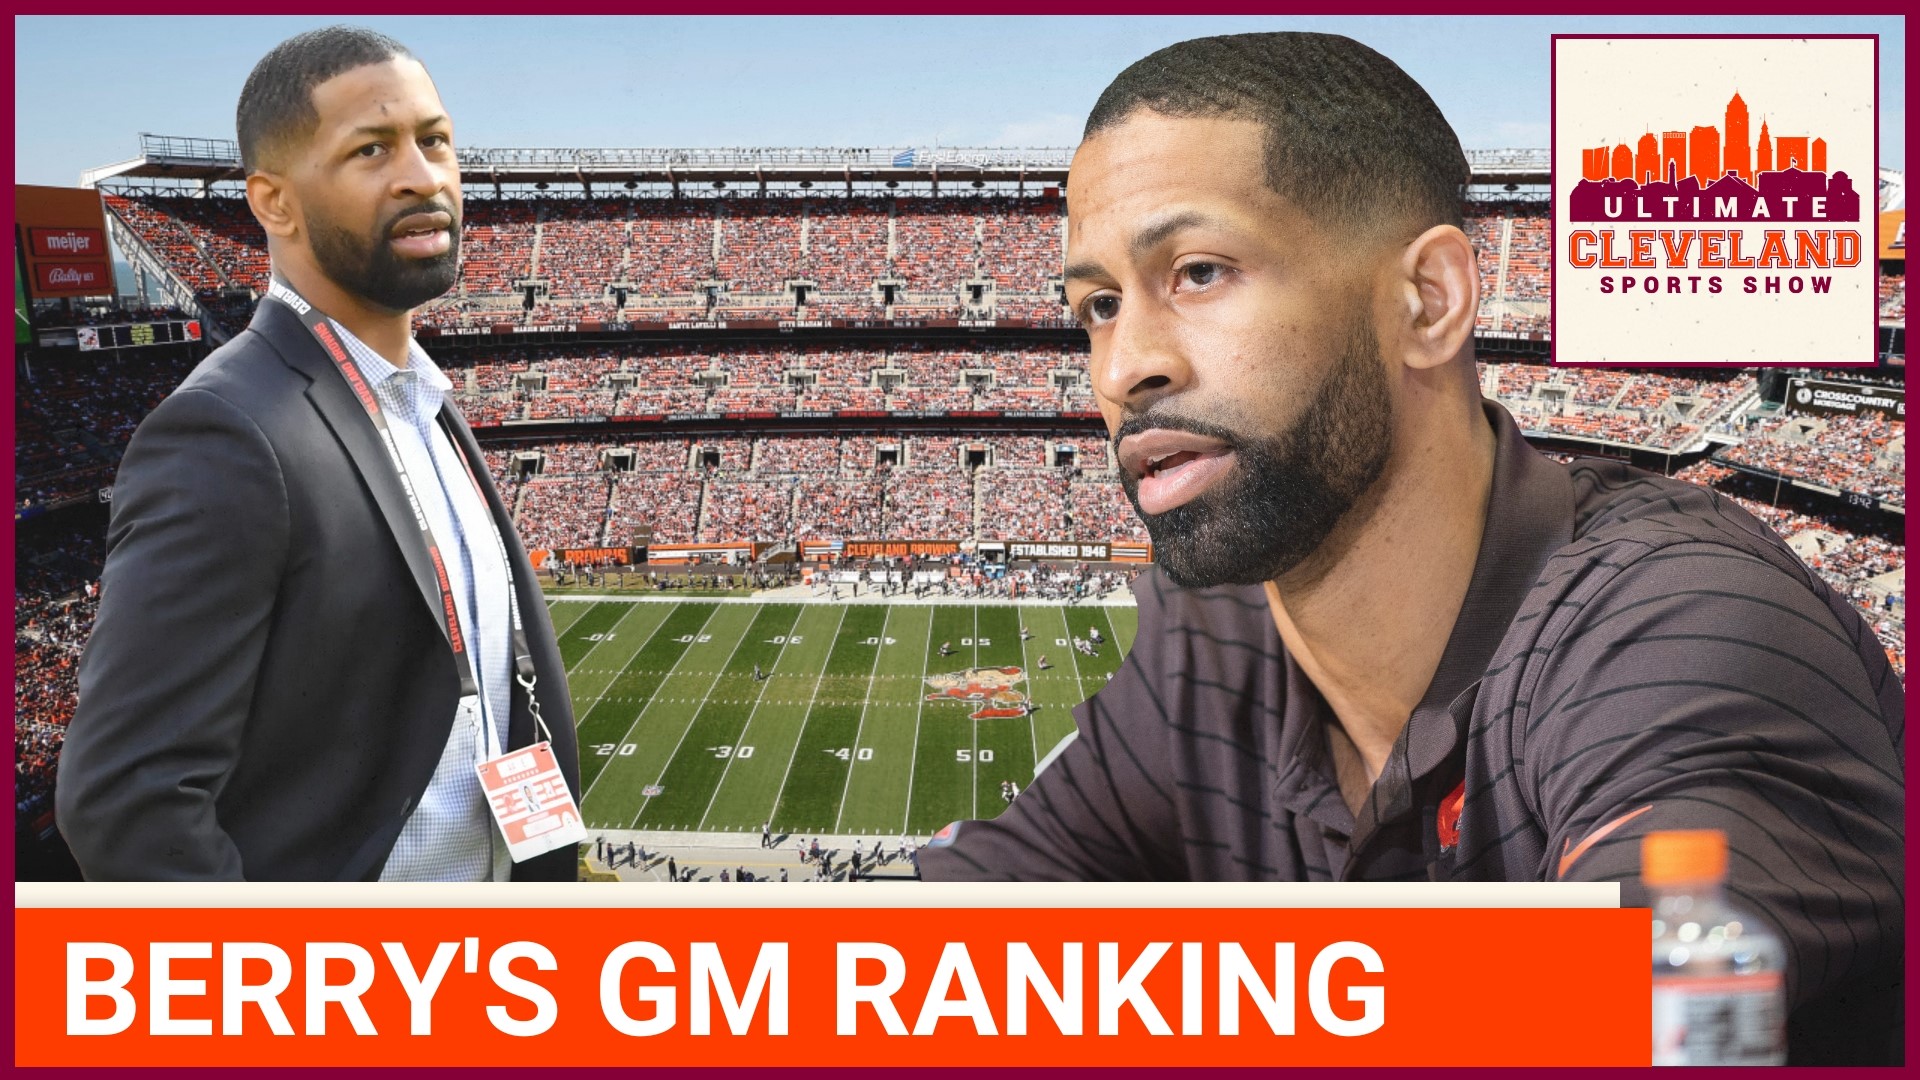 Is Andrew Berry's 19th place ranking among NFL GMs accurate?